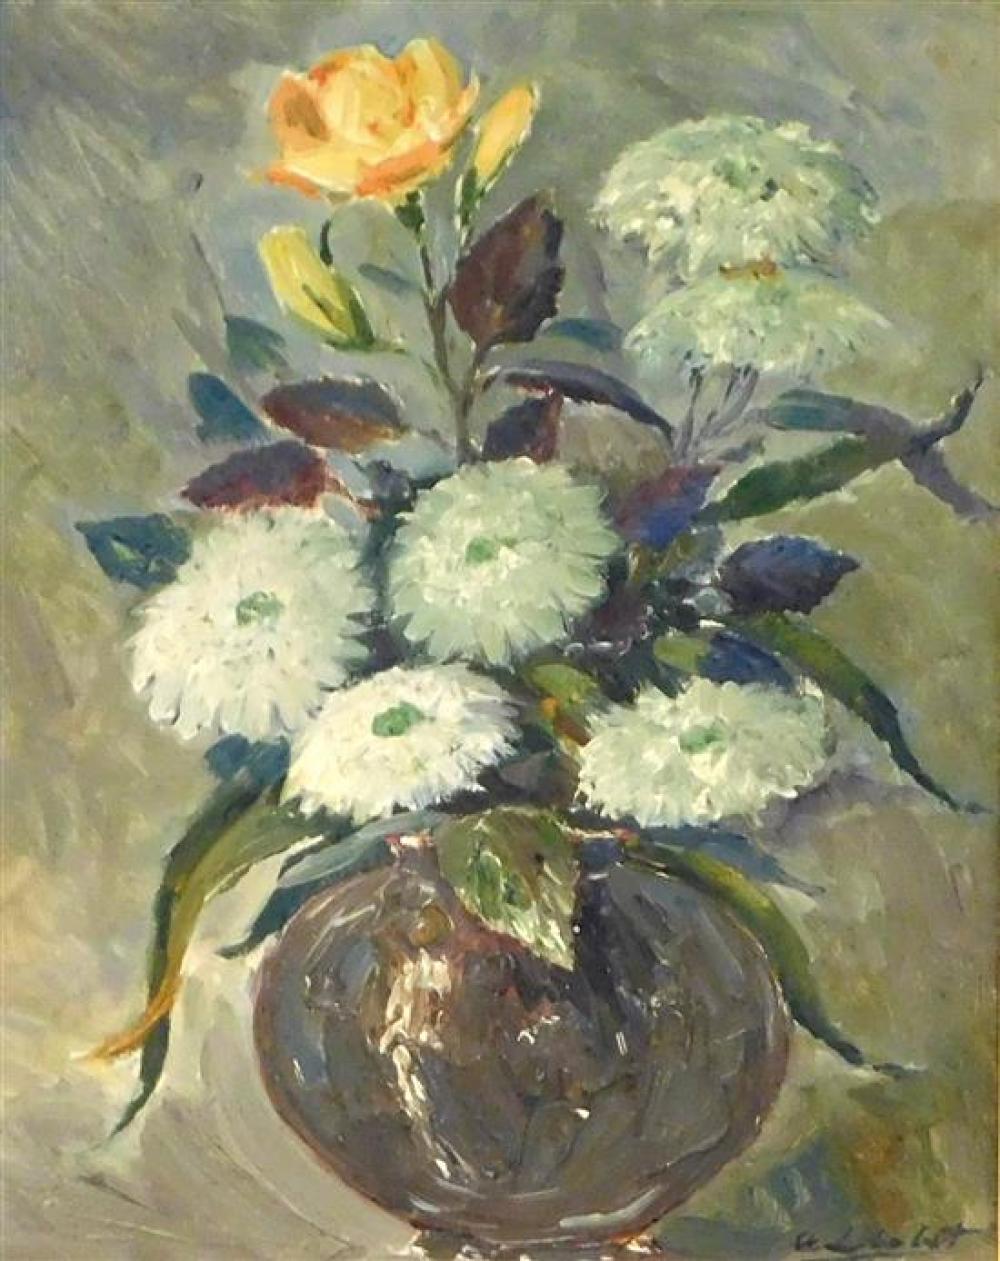 OIL ON CANVAS, EARLY 20TH C., DEPICTS